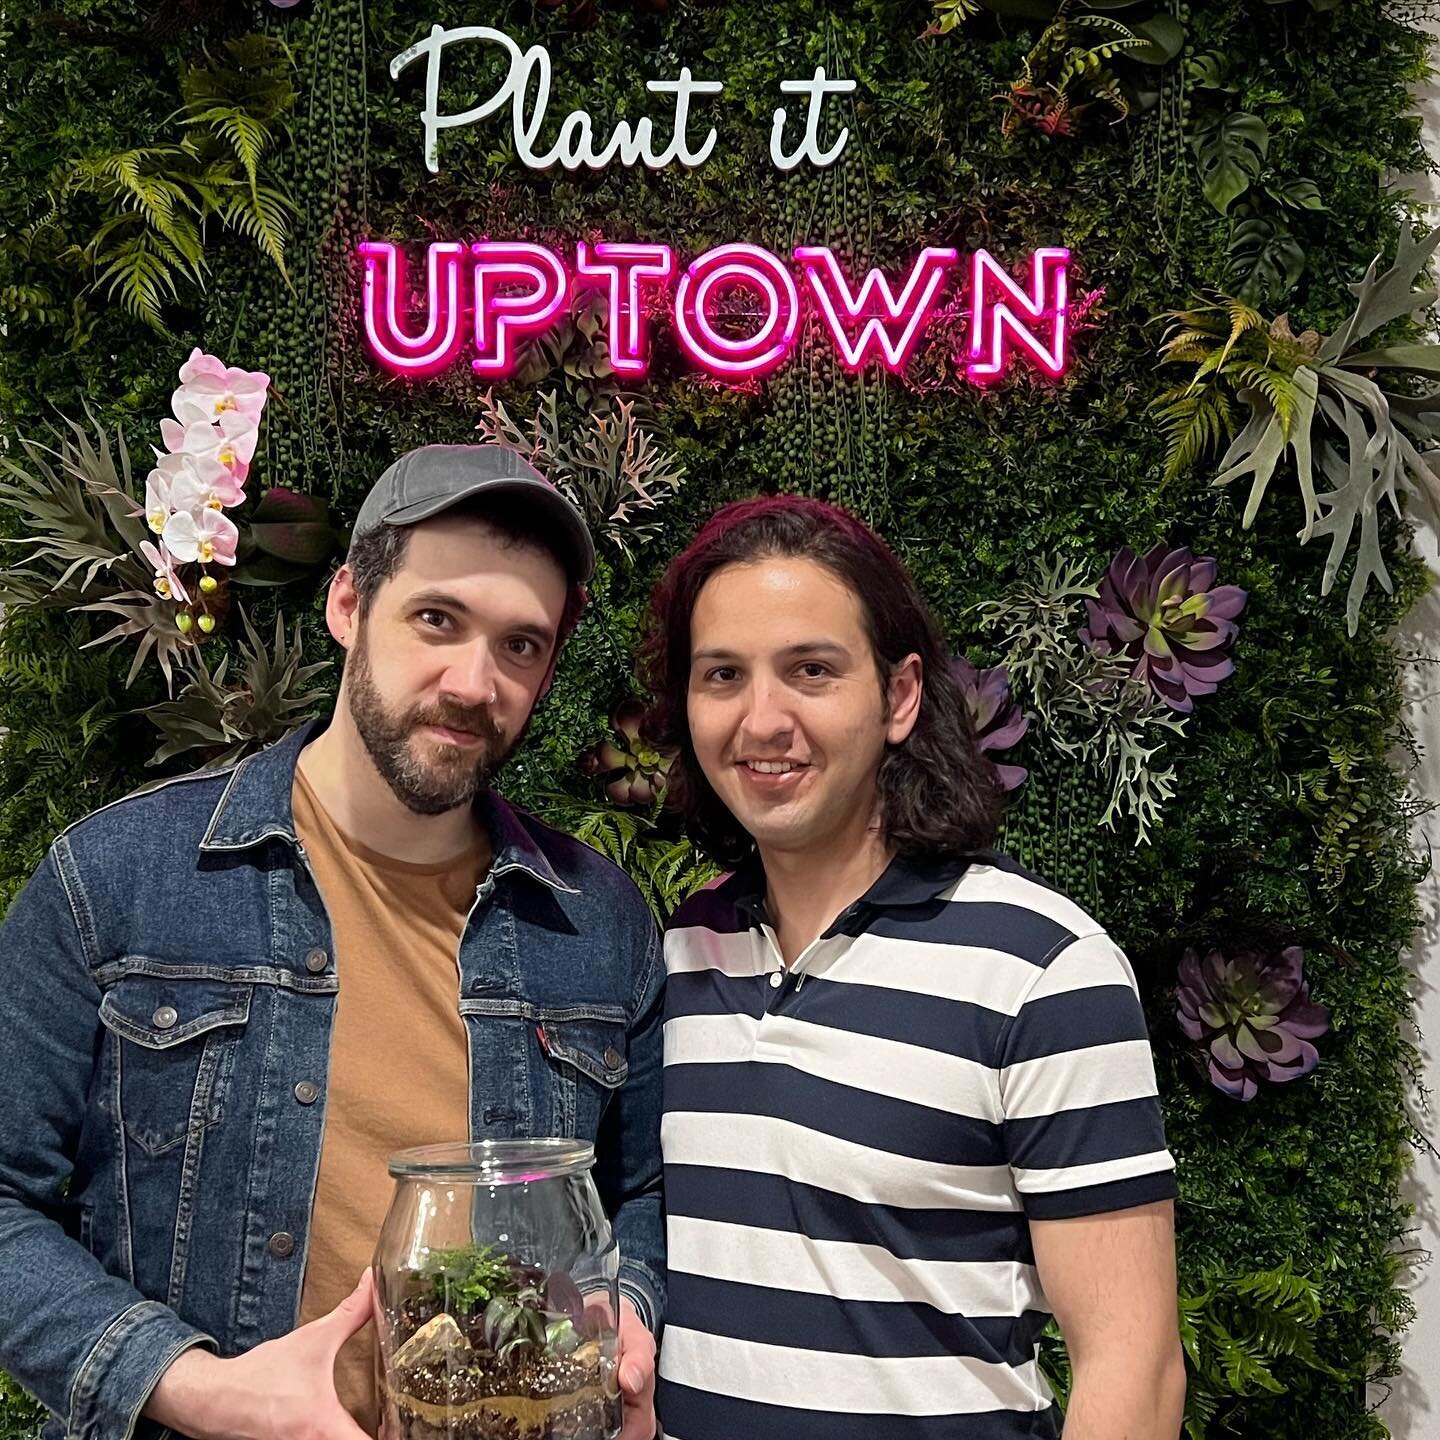 Hi! I&rsquo;ve been super busy lately and sort of MIA, but I of course had time to come take this amazing terrarium class for @brianlovescake! I hope to get back to posting my knitting soon&hellip; but if you want to learn about terrariums, I can hig